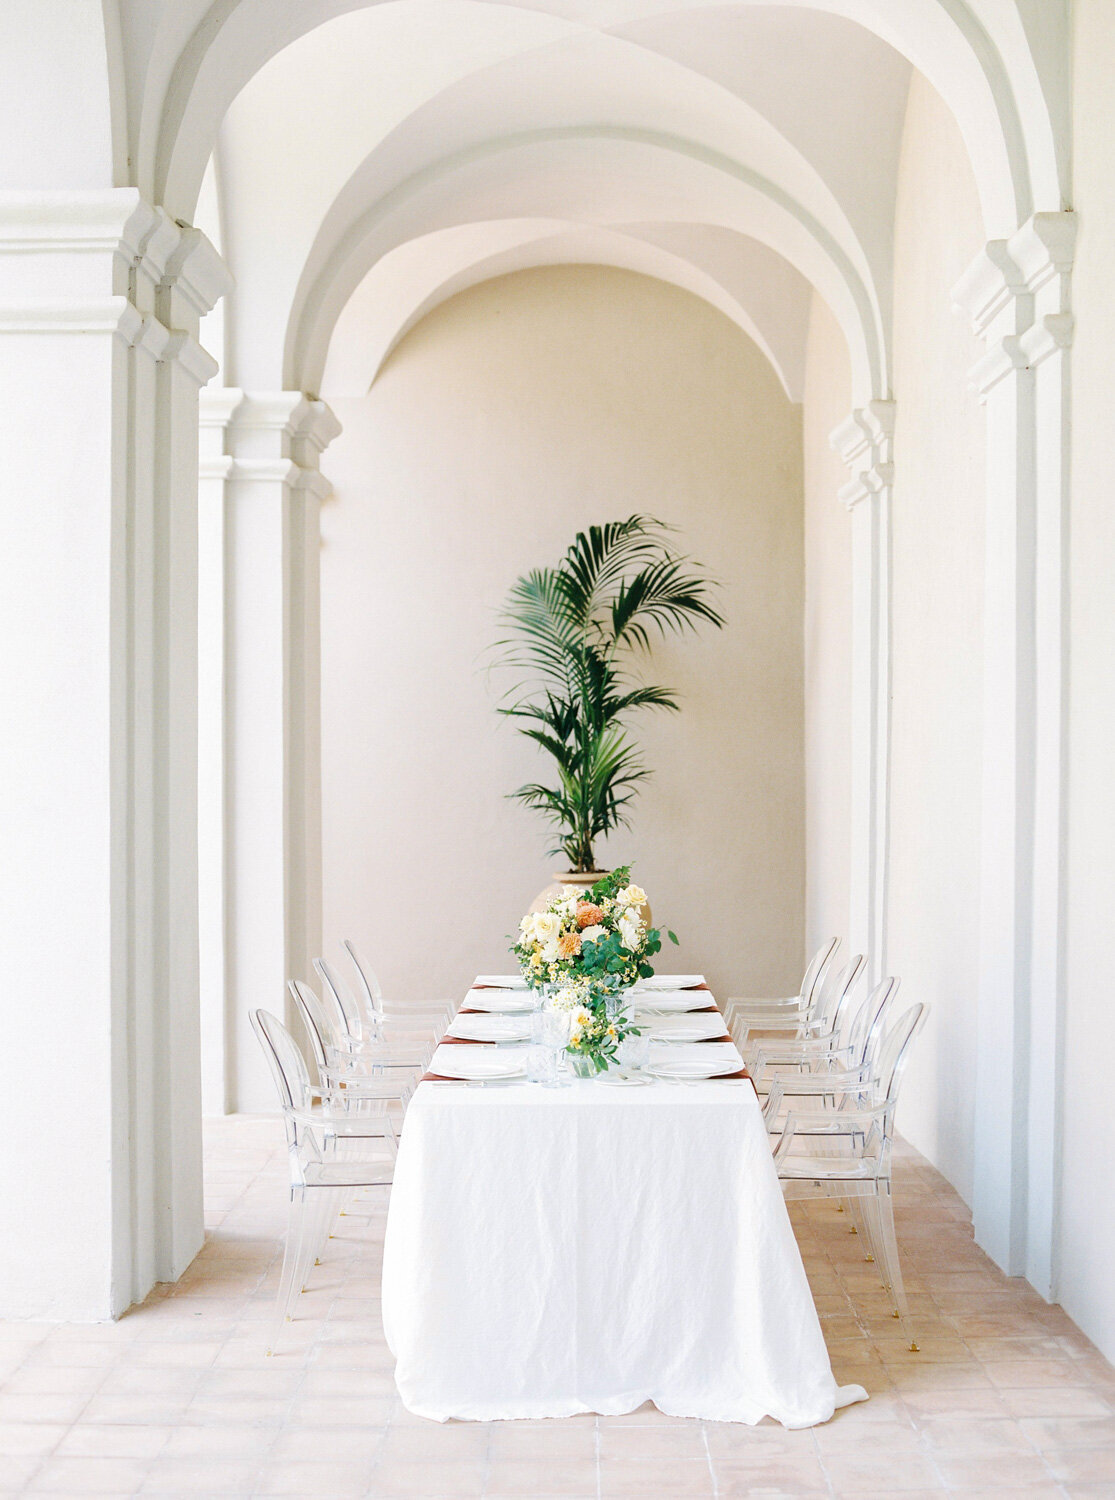 Table Setting at Villa Paola Tropea curated by Gionata Russo and Agnese Ferraro